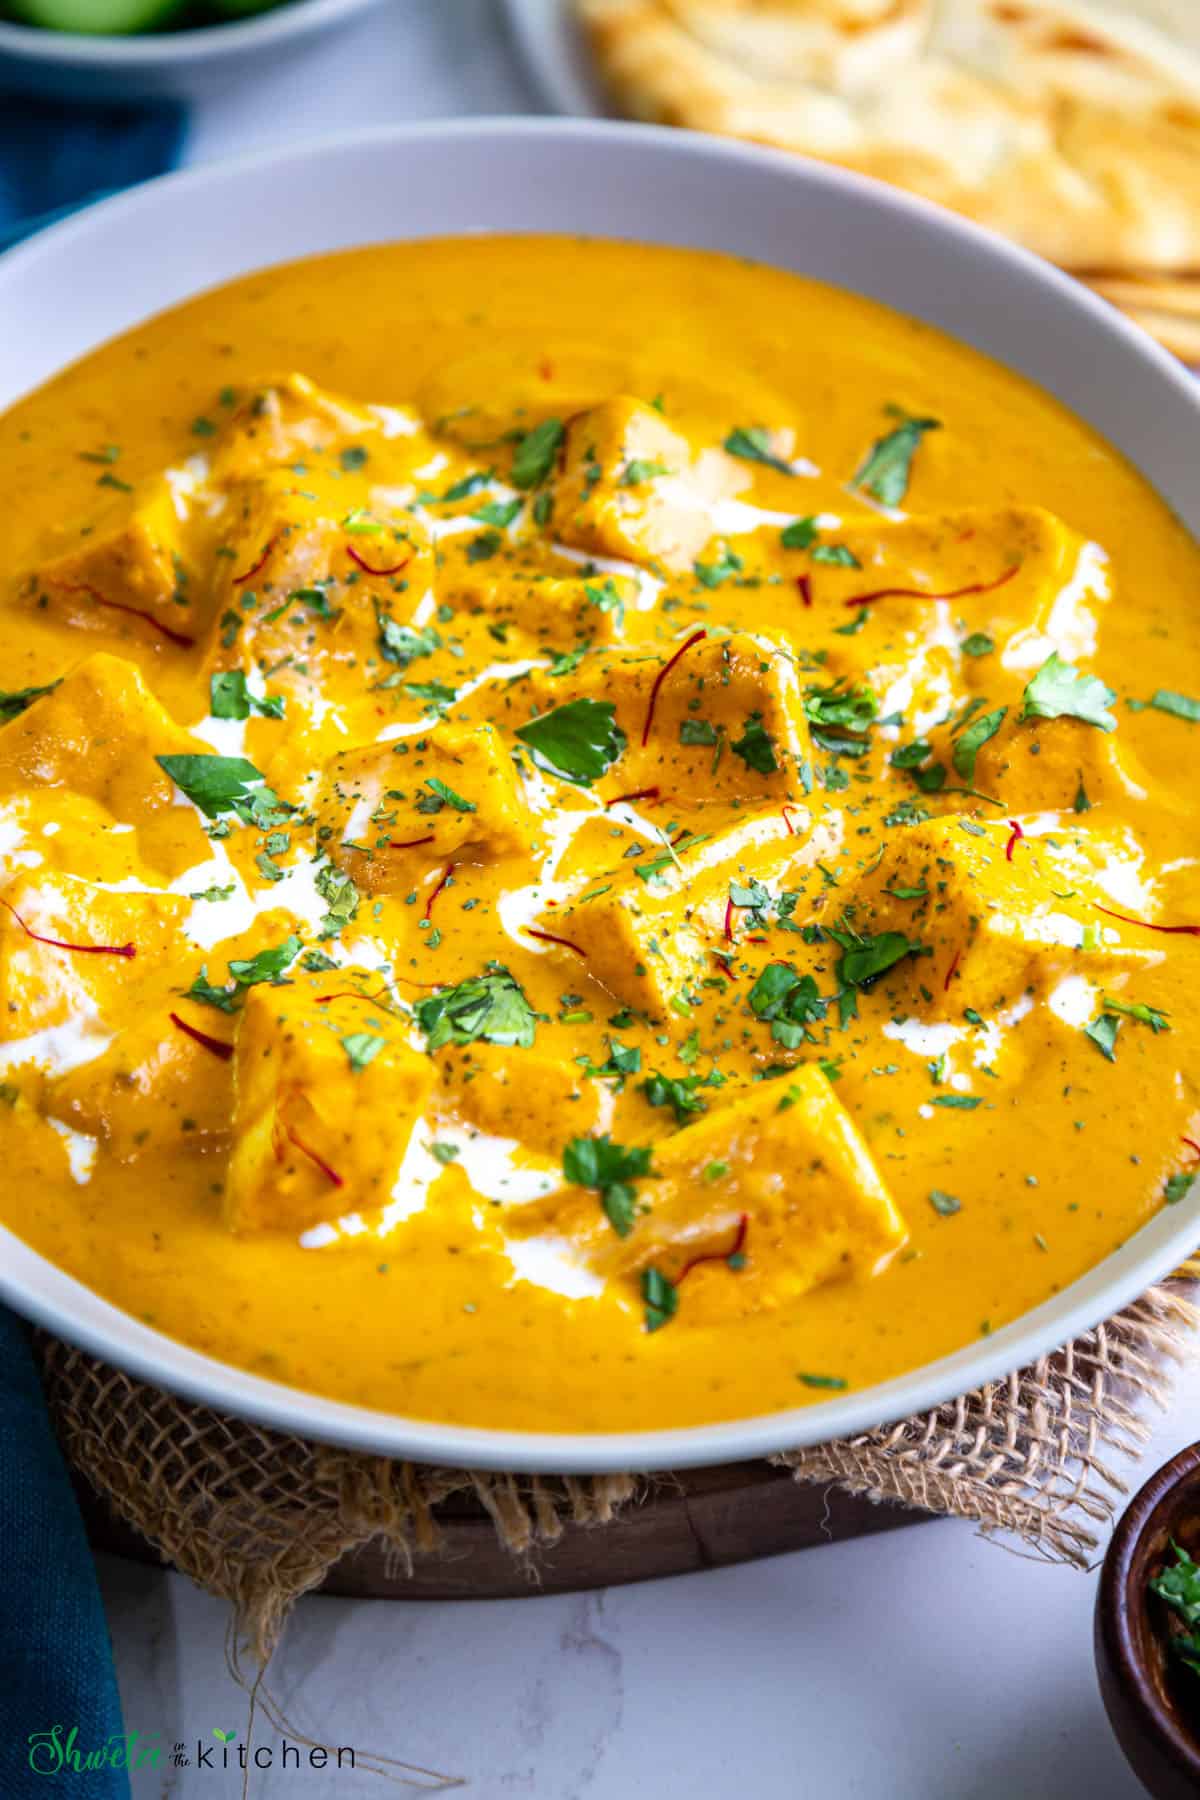 Side view of bowl of shahi paneer garnished with cilantro, saffron and cream